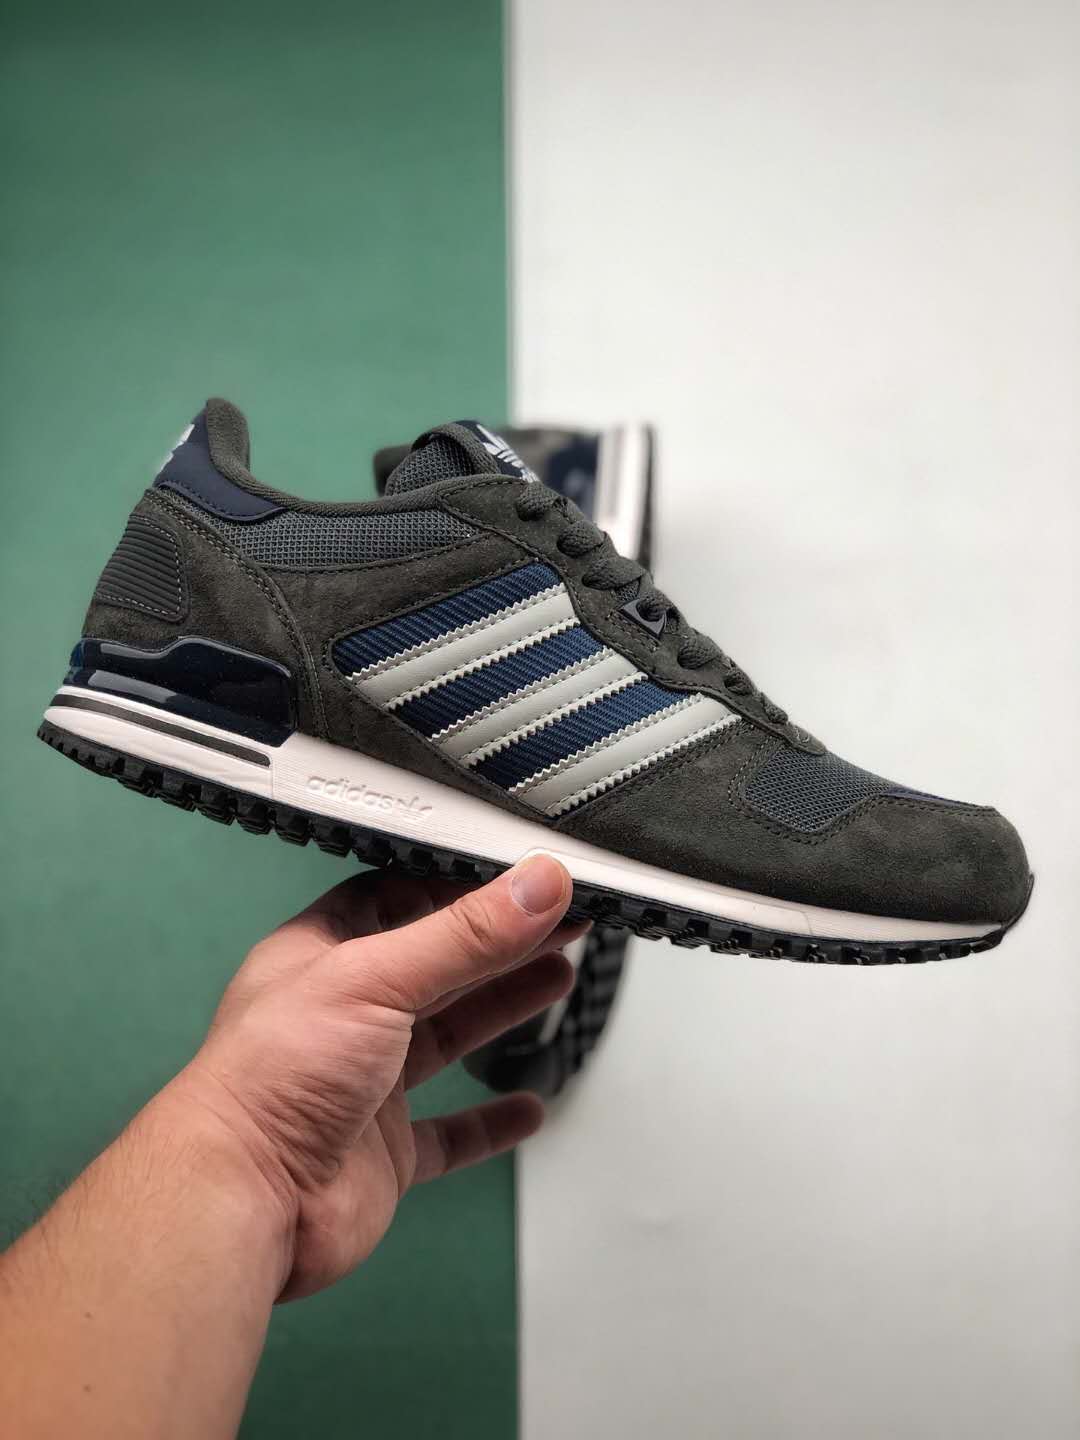 Adidas ZX 700 M19391 - Stylish and Comfortable Sneakers